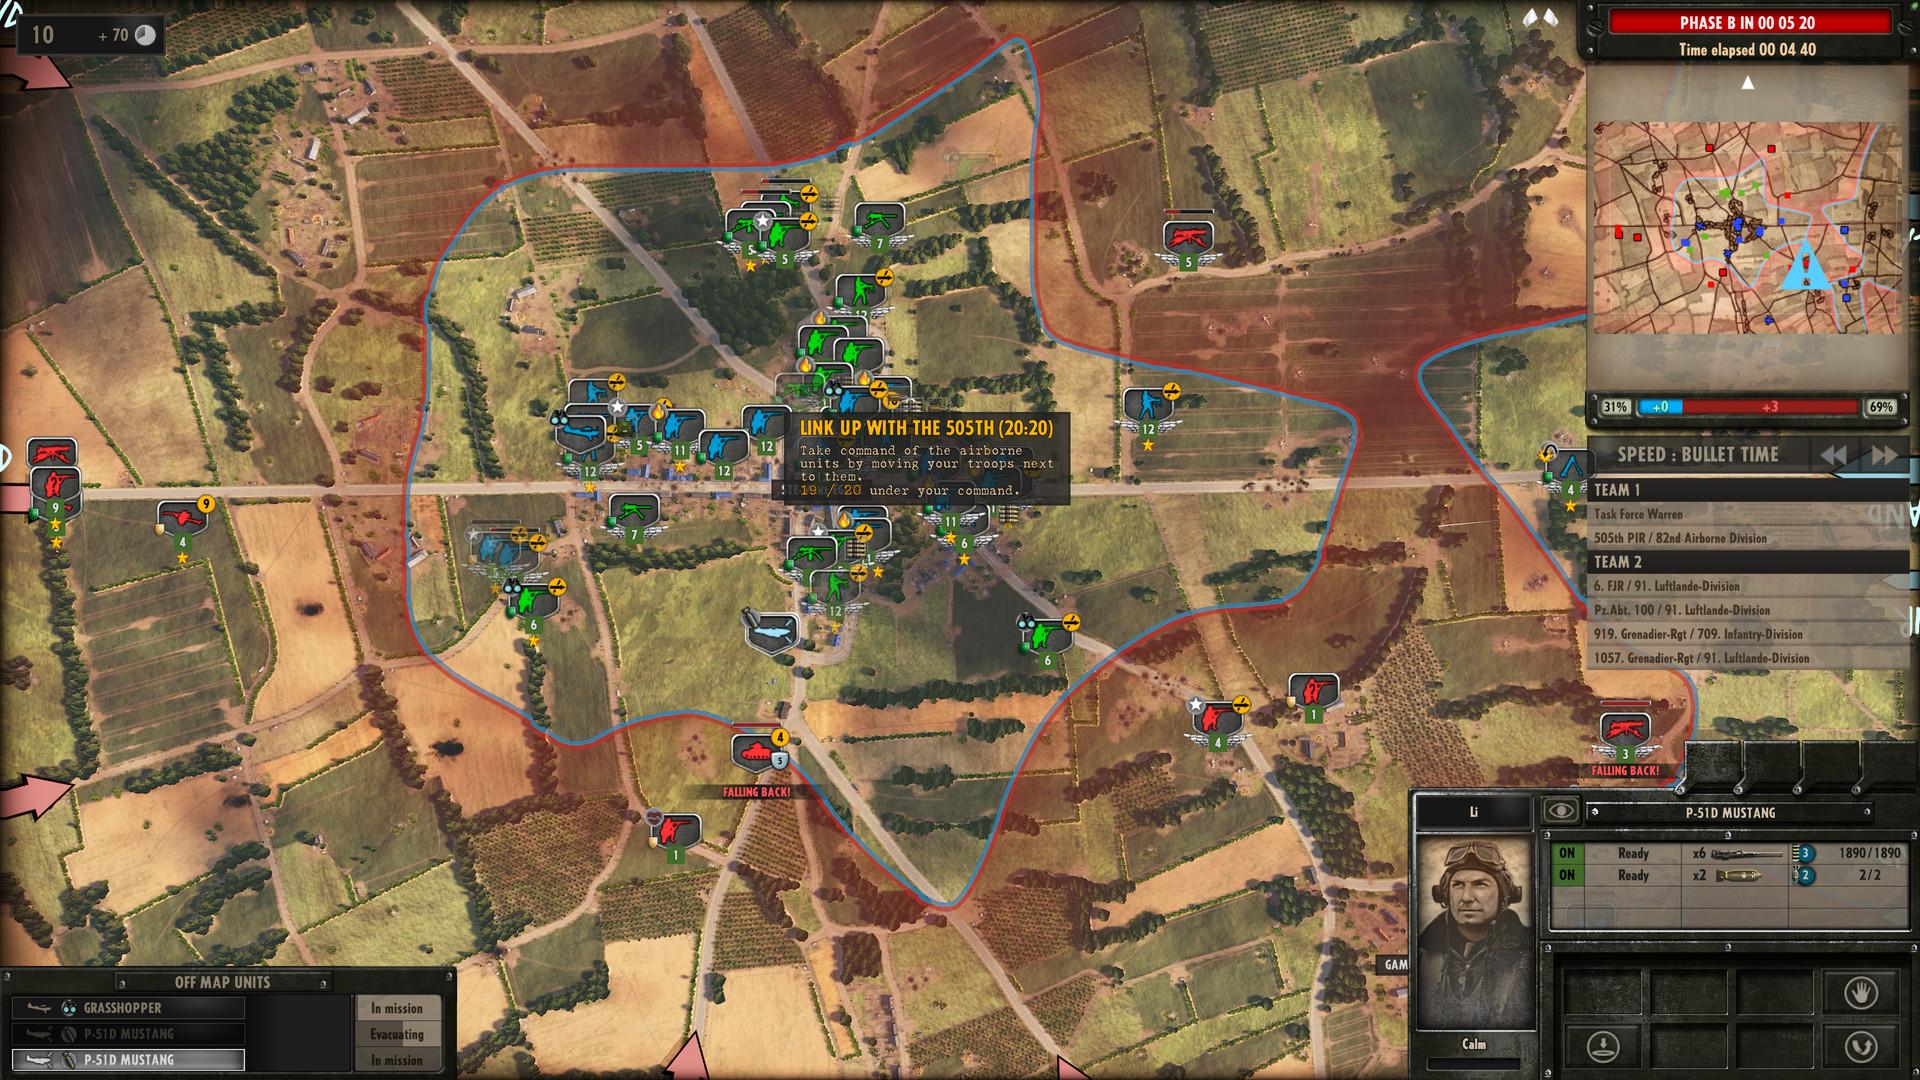 Screenshot №10 from game Steel Division: Normandy 44